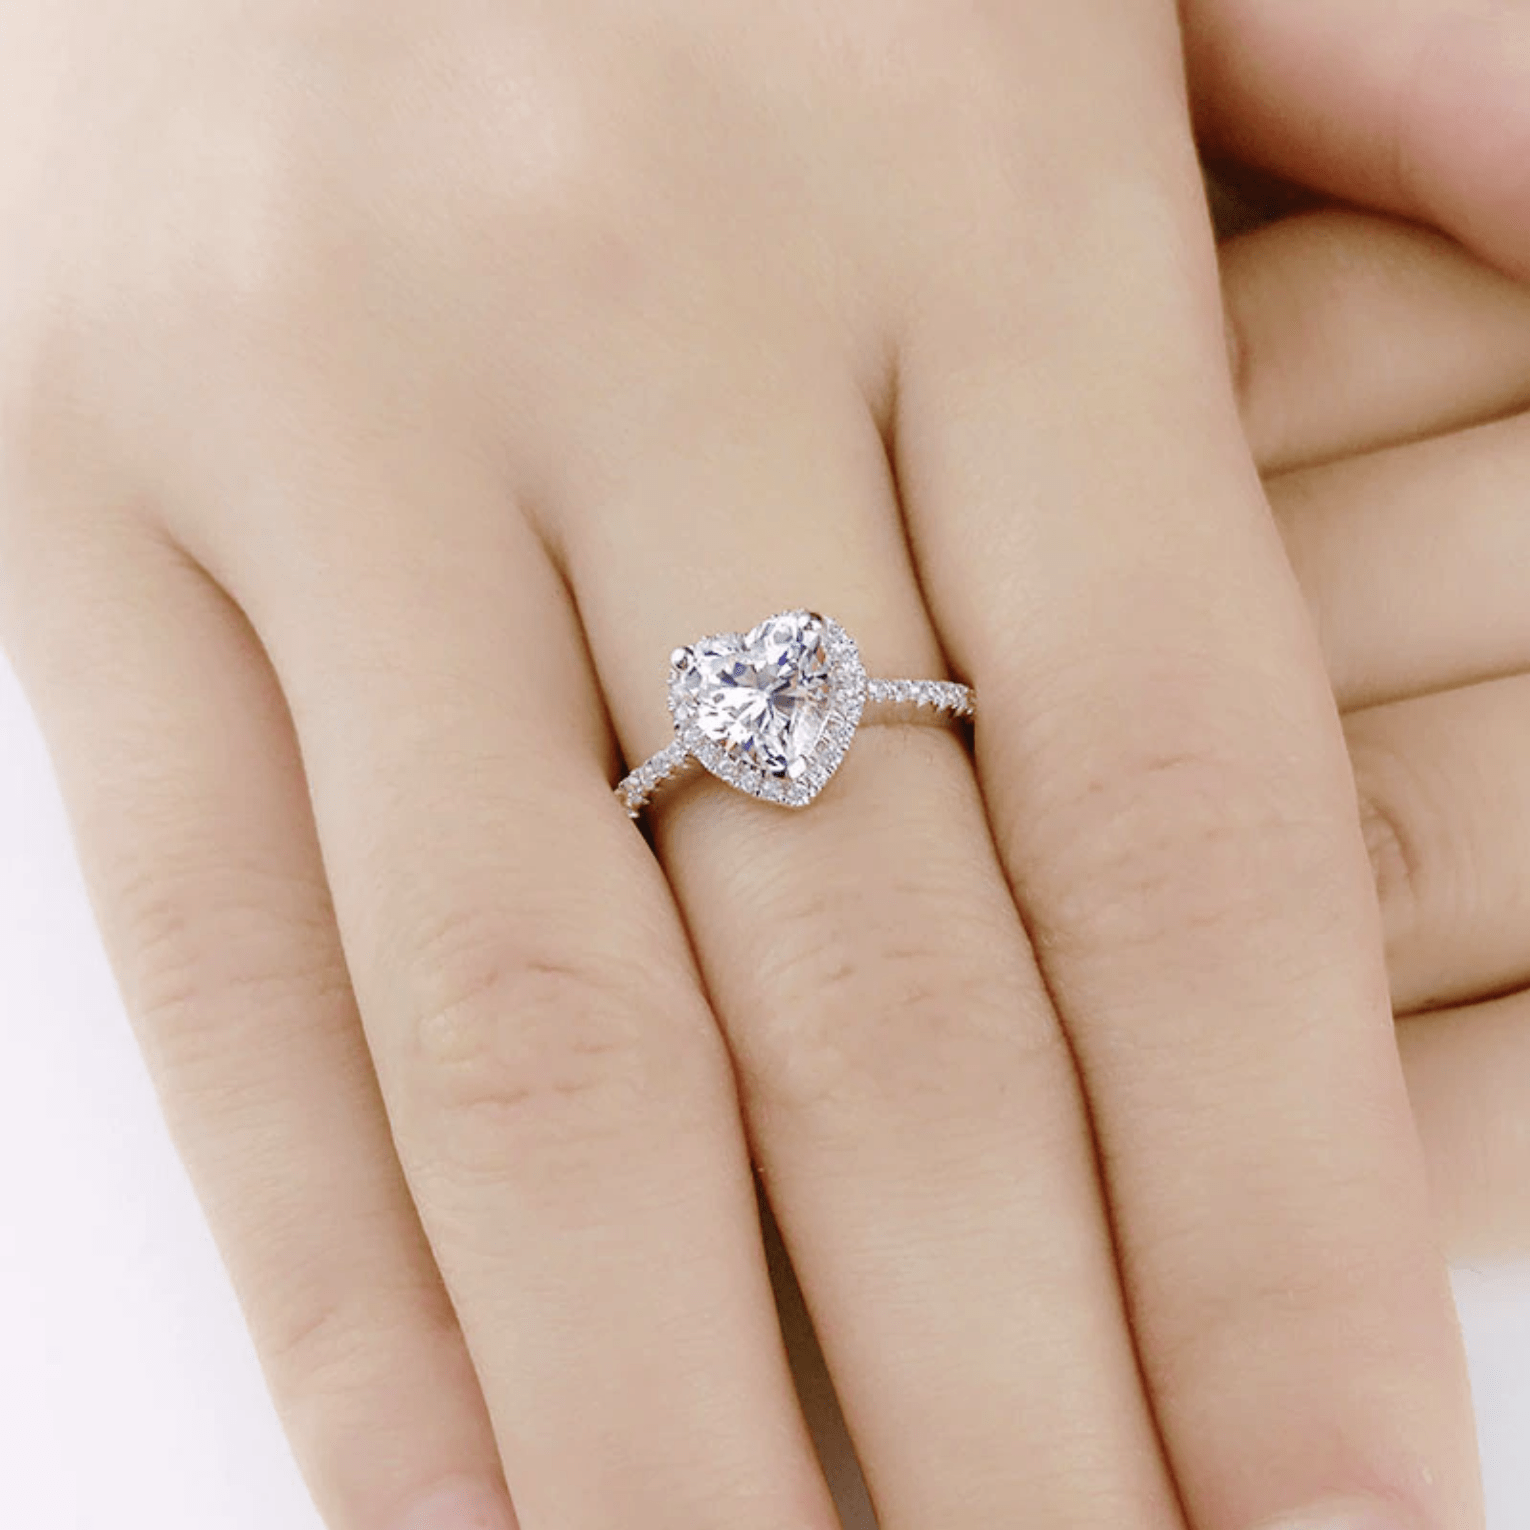 The Camille Heart Ring